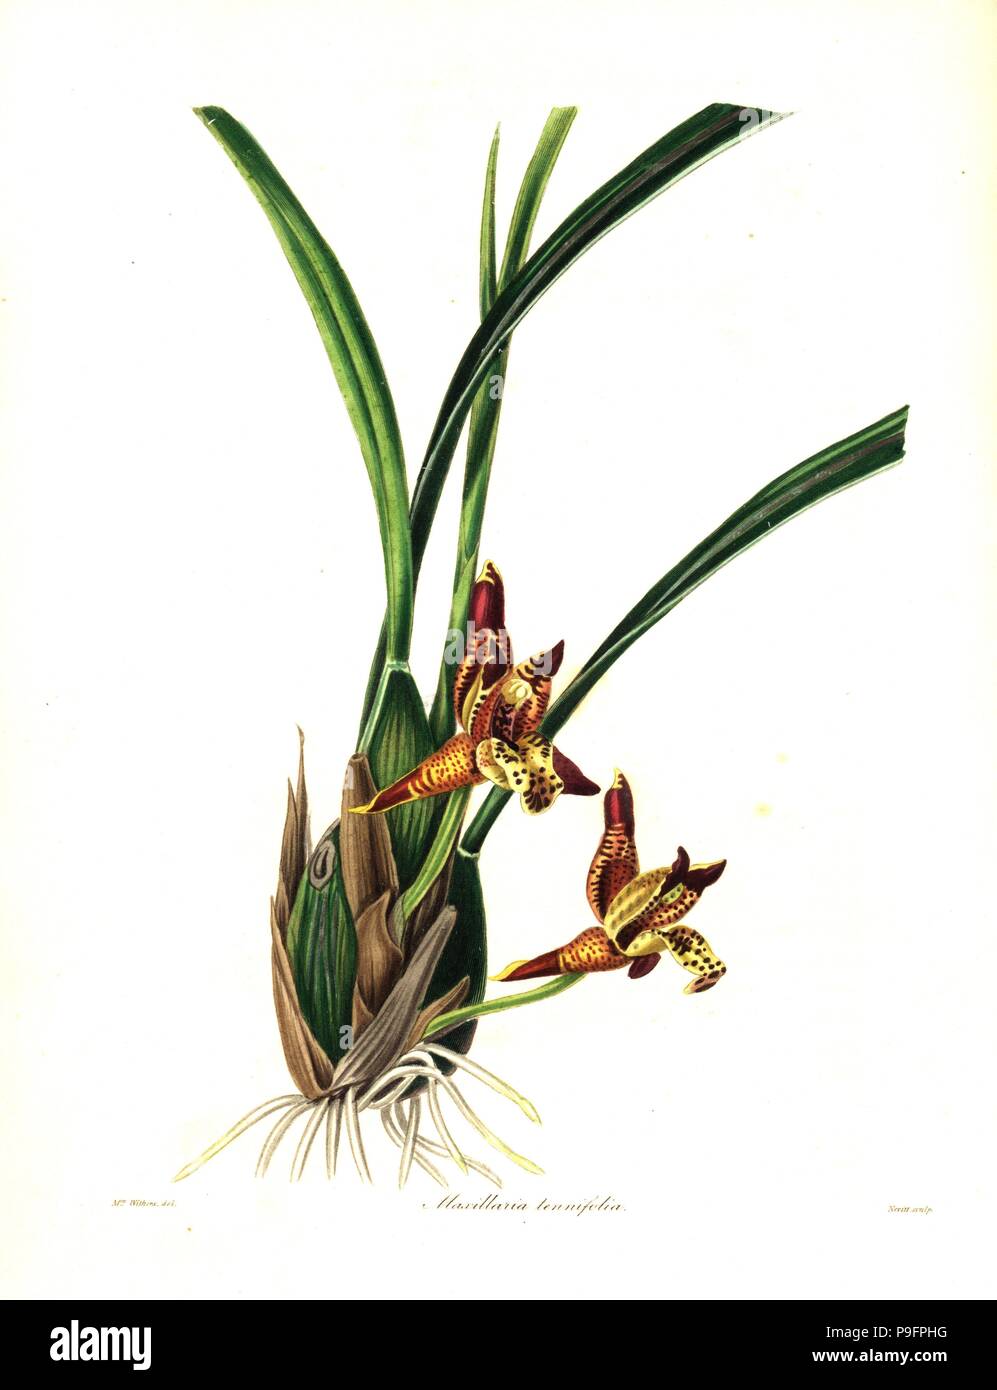 Delicate-leafed maxillaria or coconut pie orchid, Maxillariella tenuifolia. (Narrow-leaved maxillaria, Maxillaria tenuifolia). Handcoloured copperplate engraving by S. Nevitt after a botanical illustration by Mrs Augusta Withers from Benjamin Maund and the Rev. John Stevens Henslow's The Botanist, London, 1836. Stock Photo